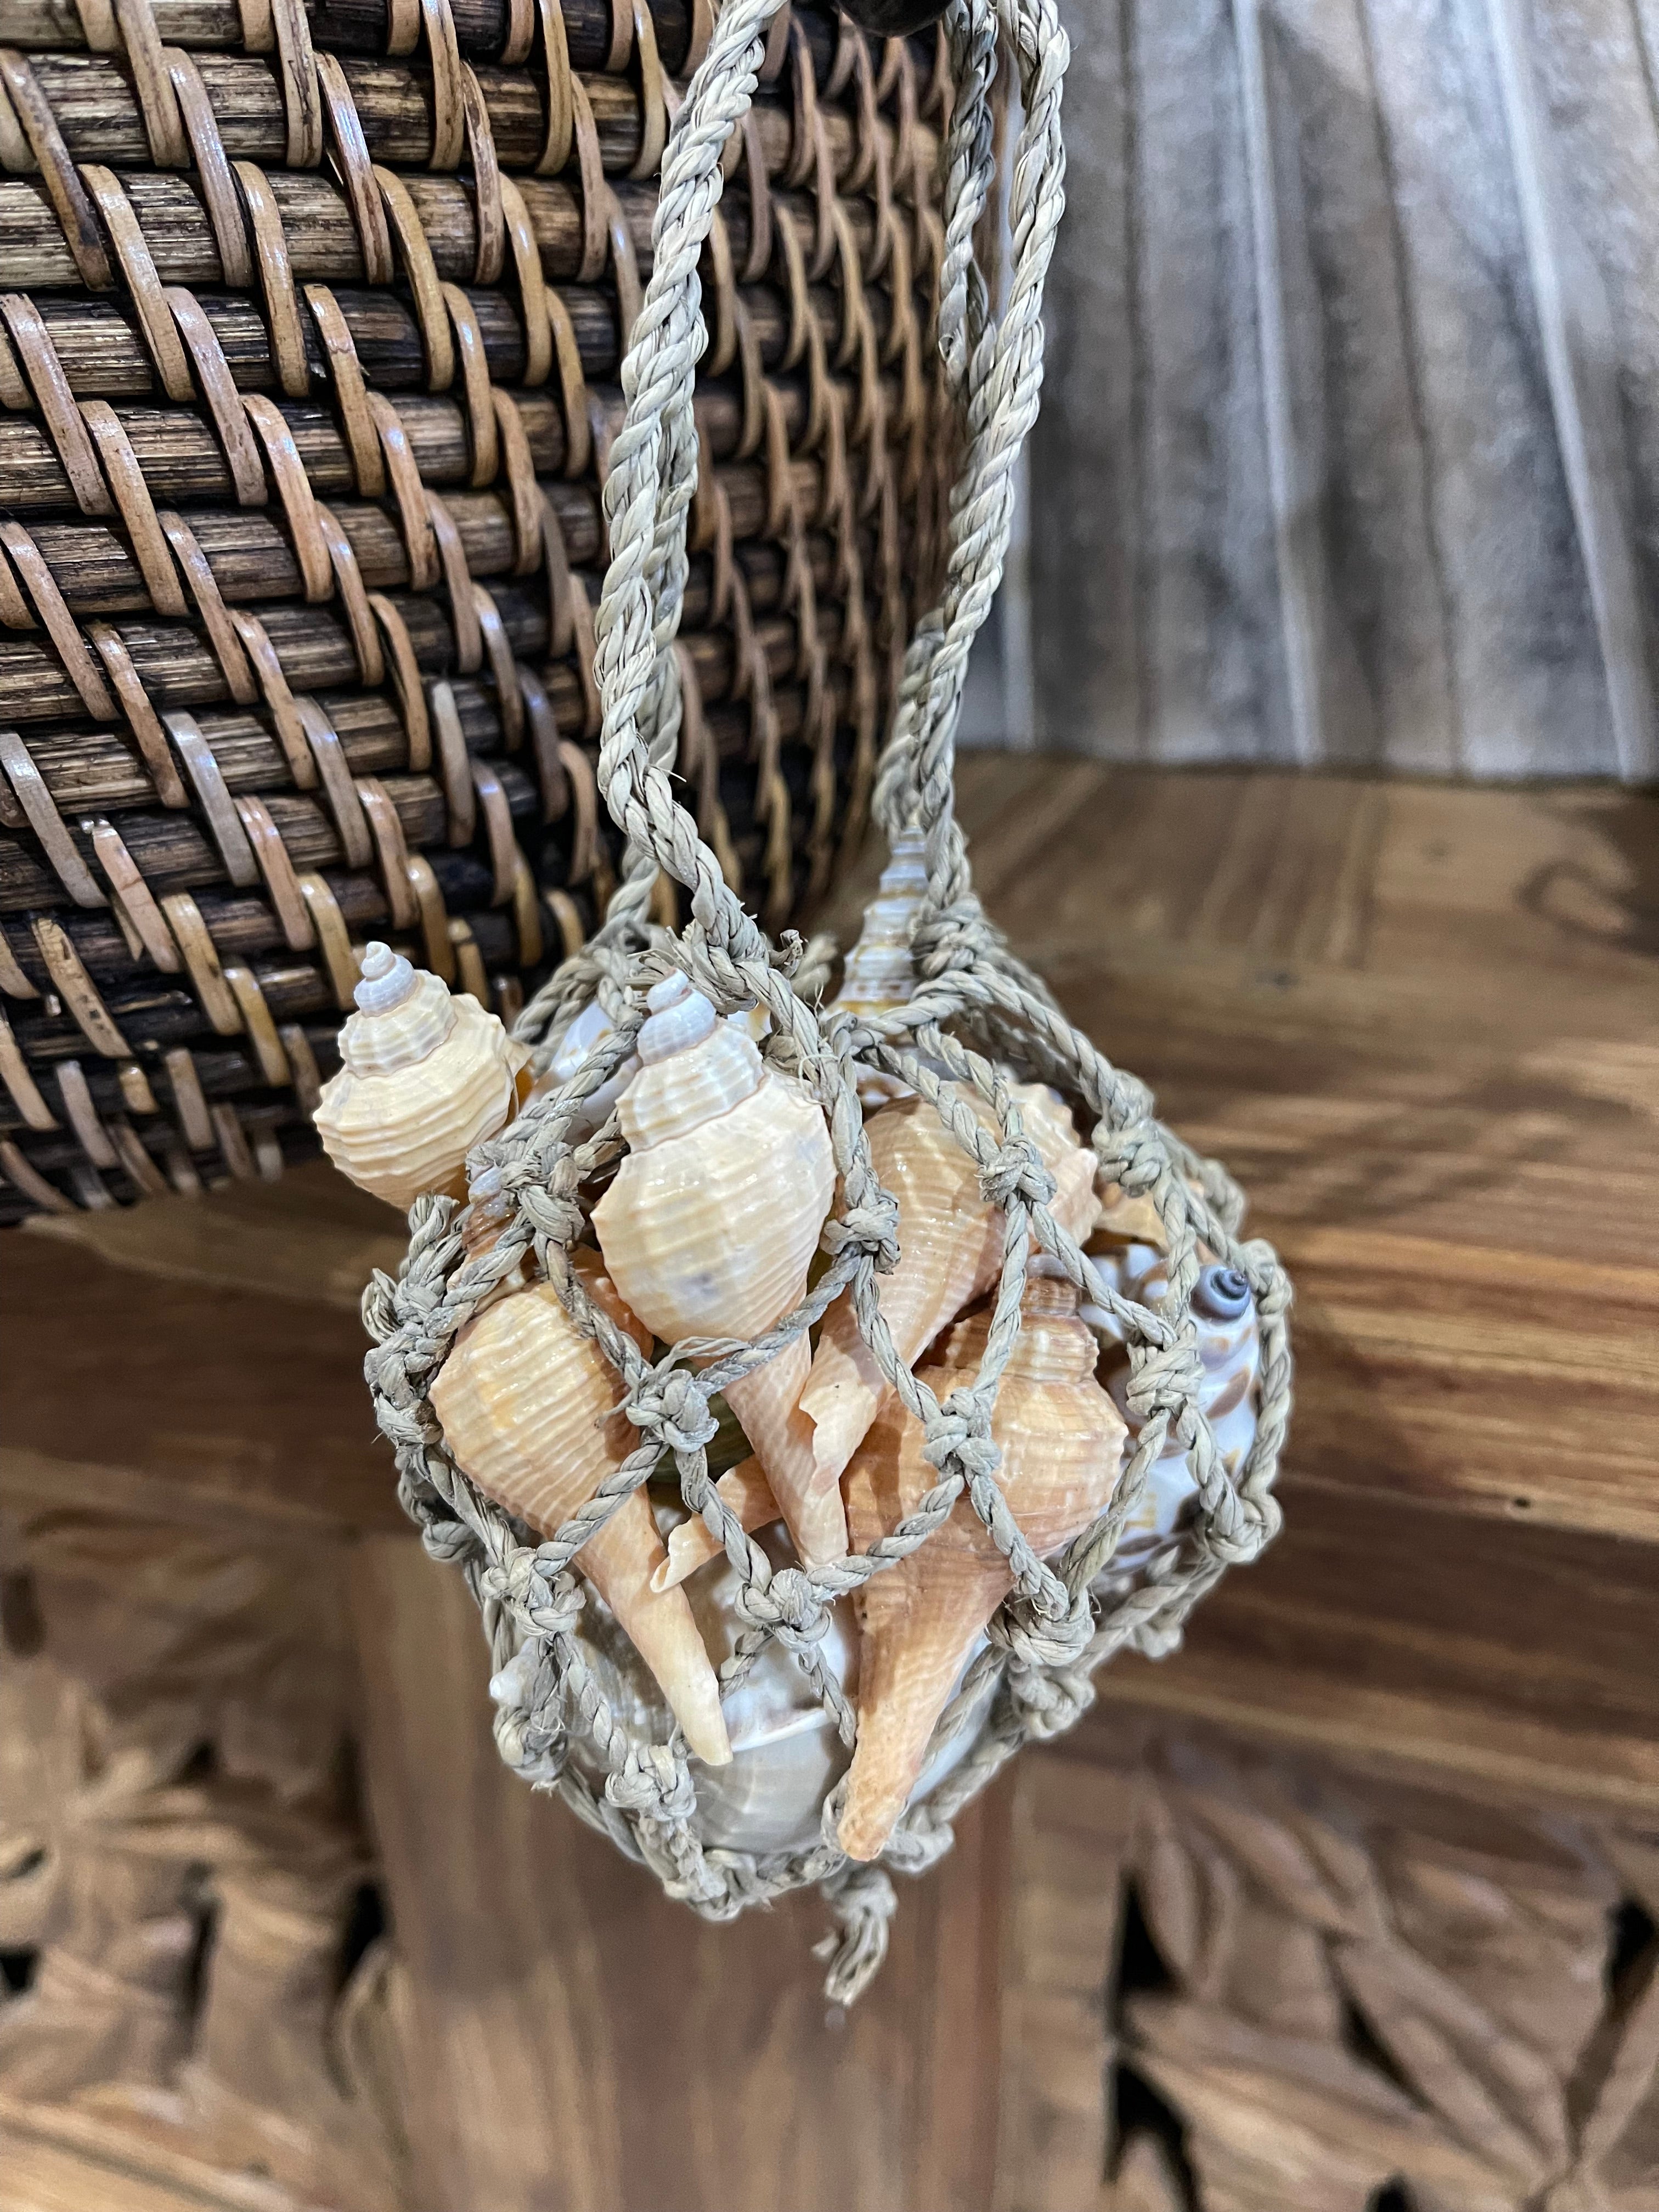 Balinese Hand Crafted Rope Net Bag of Shells - Bali Seashells in